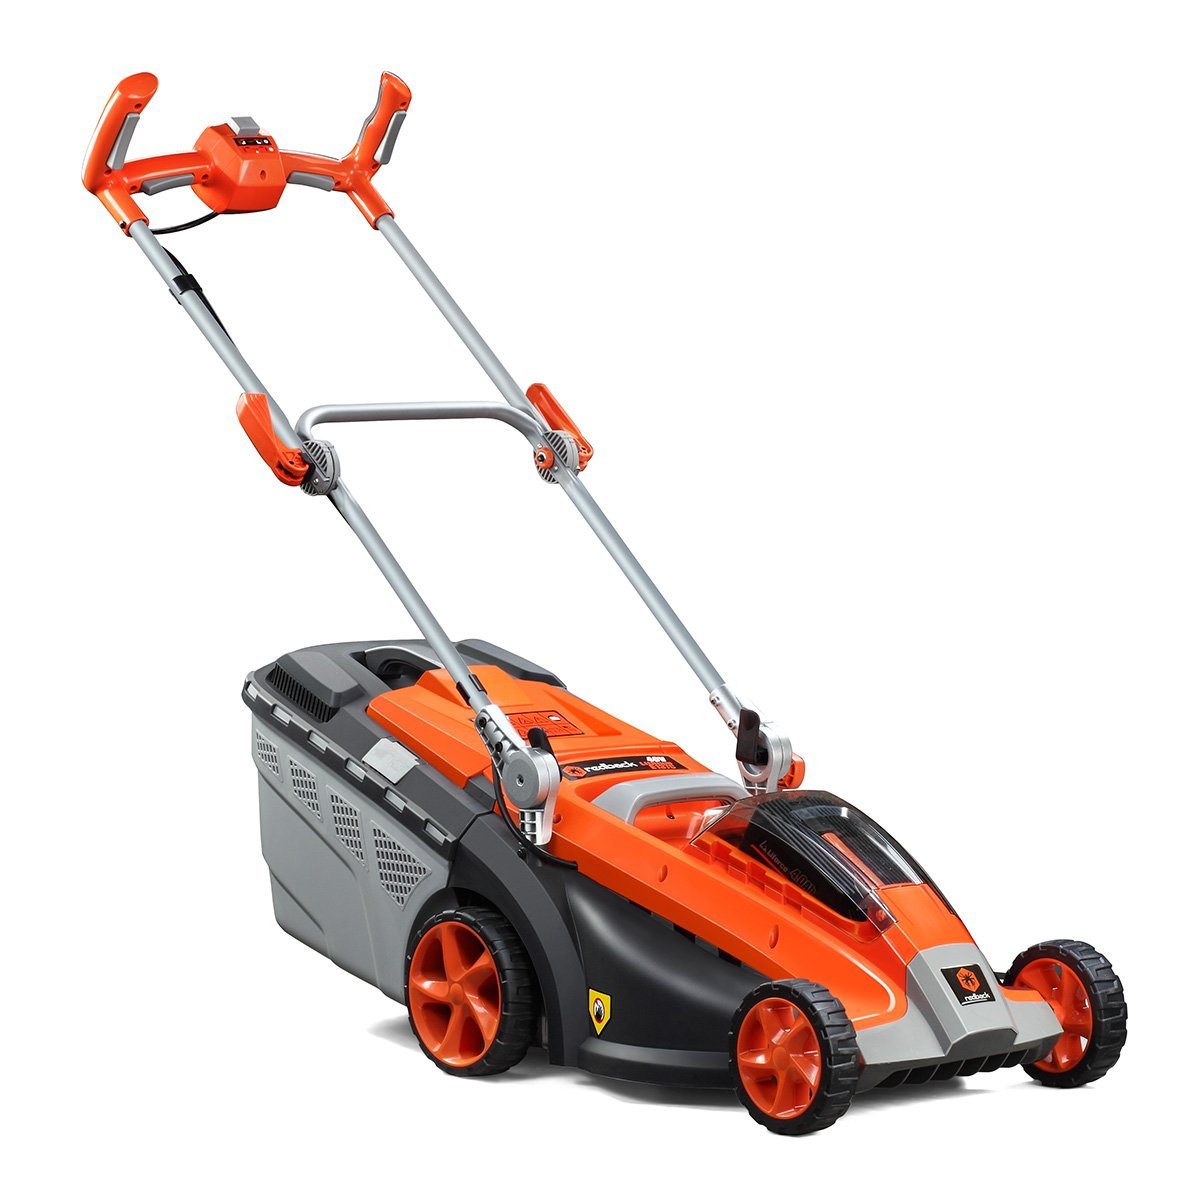 Redback E137C 40V Brushless Motor 16 Inch Deck Cordless Lawn Mower - With 6AH Battery,2ACharger